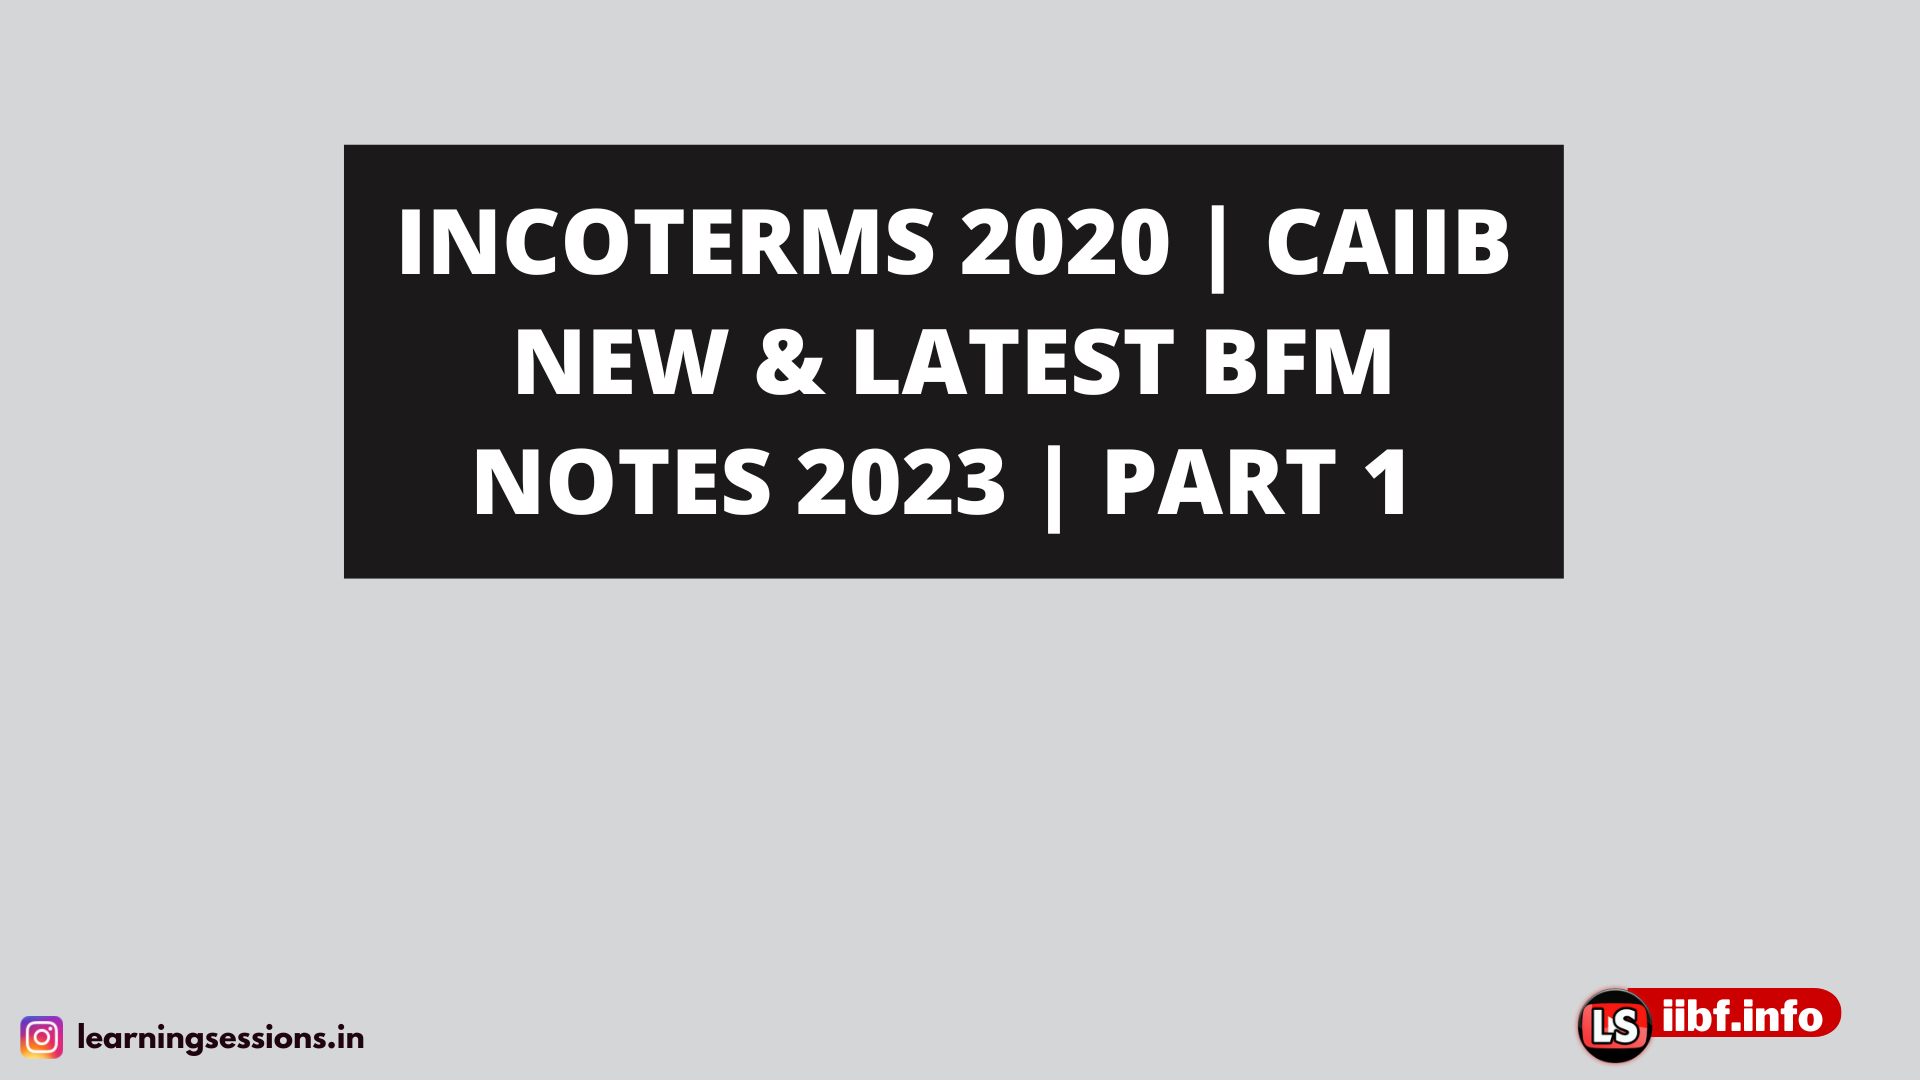 INCOTERMS 2020 | CAIIB NEW & LATEST BFM NOTES 2023 | PART 1